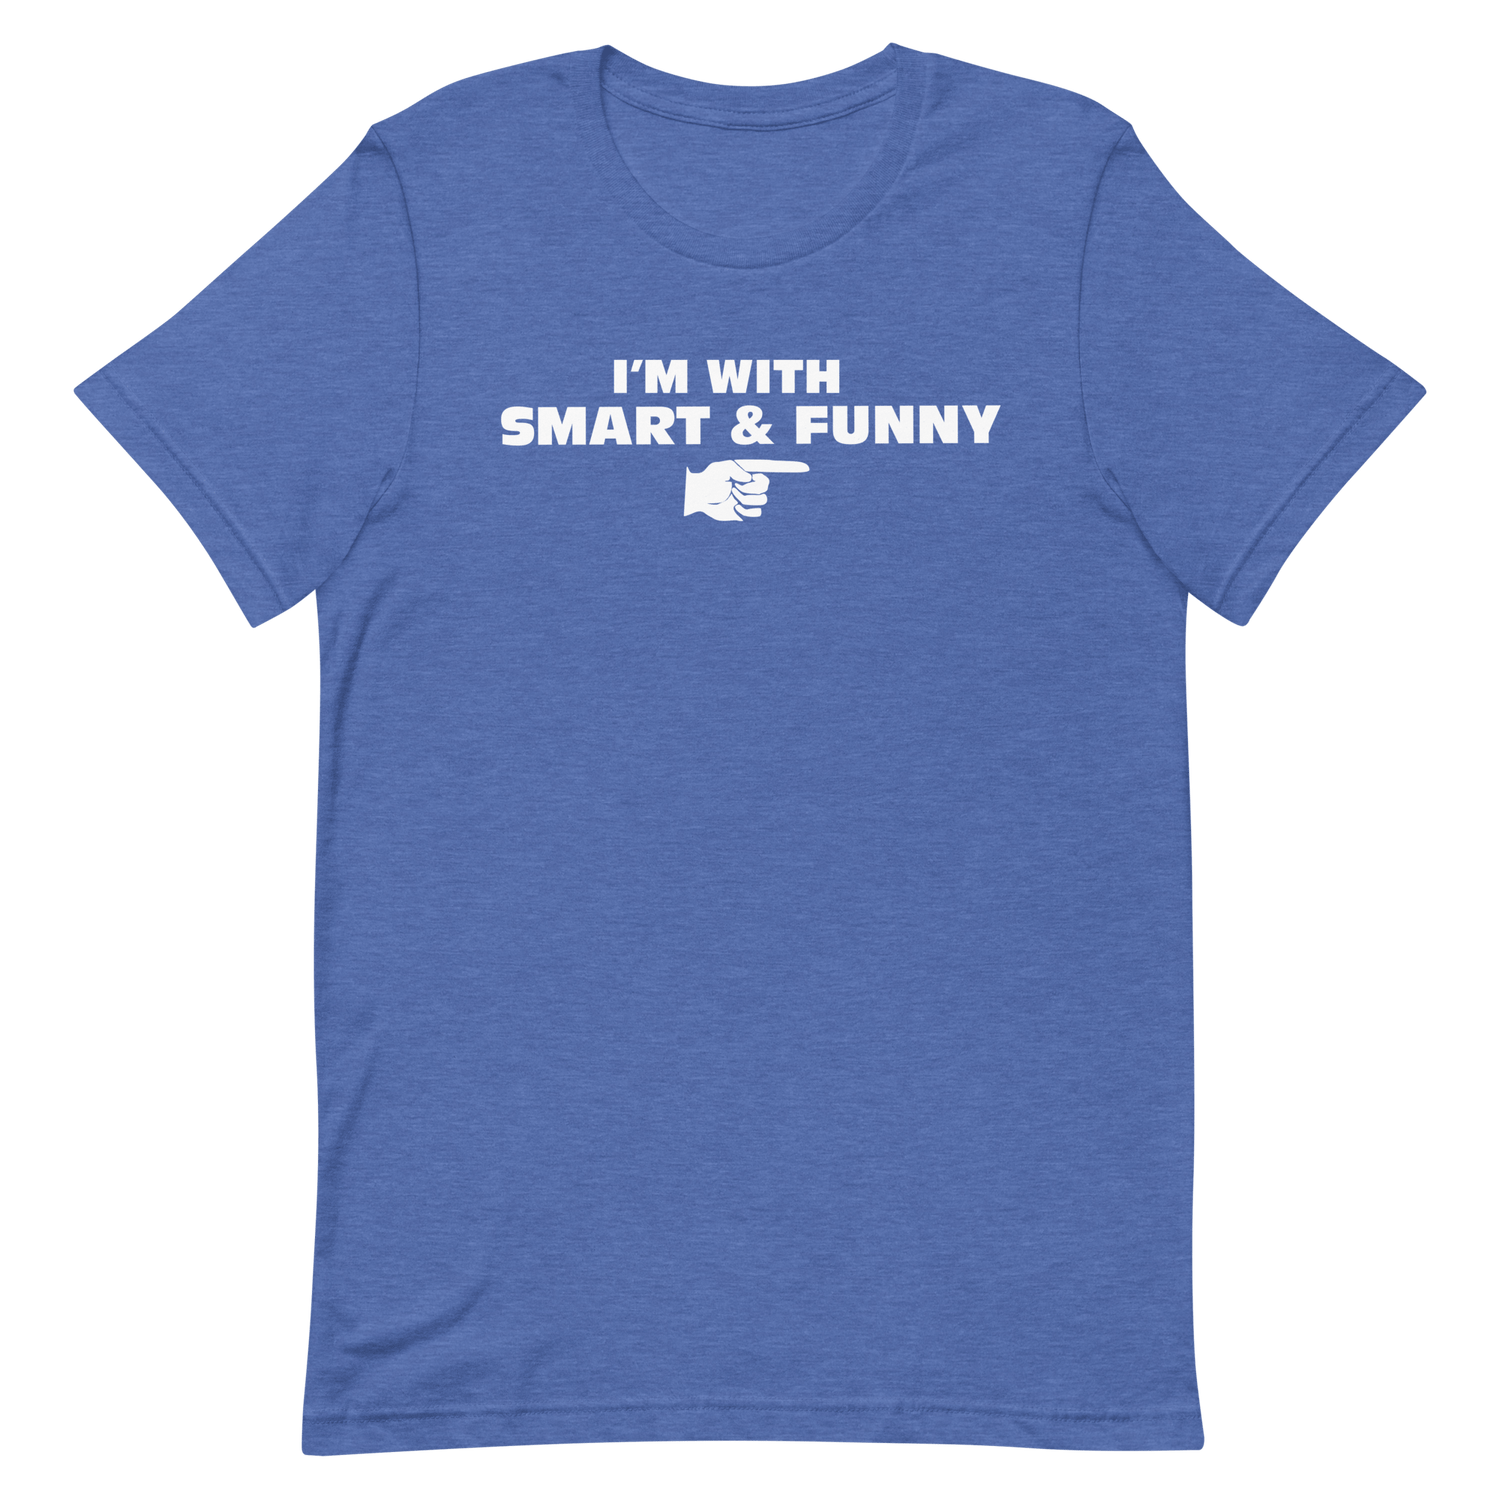 South Park I'm With Smart and Funny Unisex Premium T - Shirt - Paramount Shop